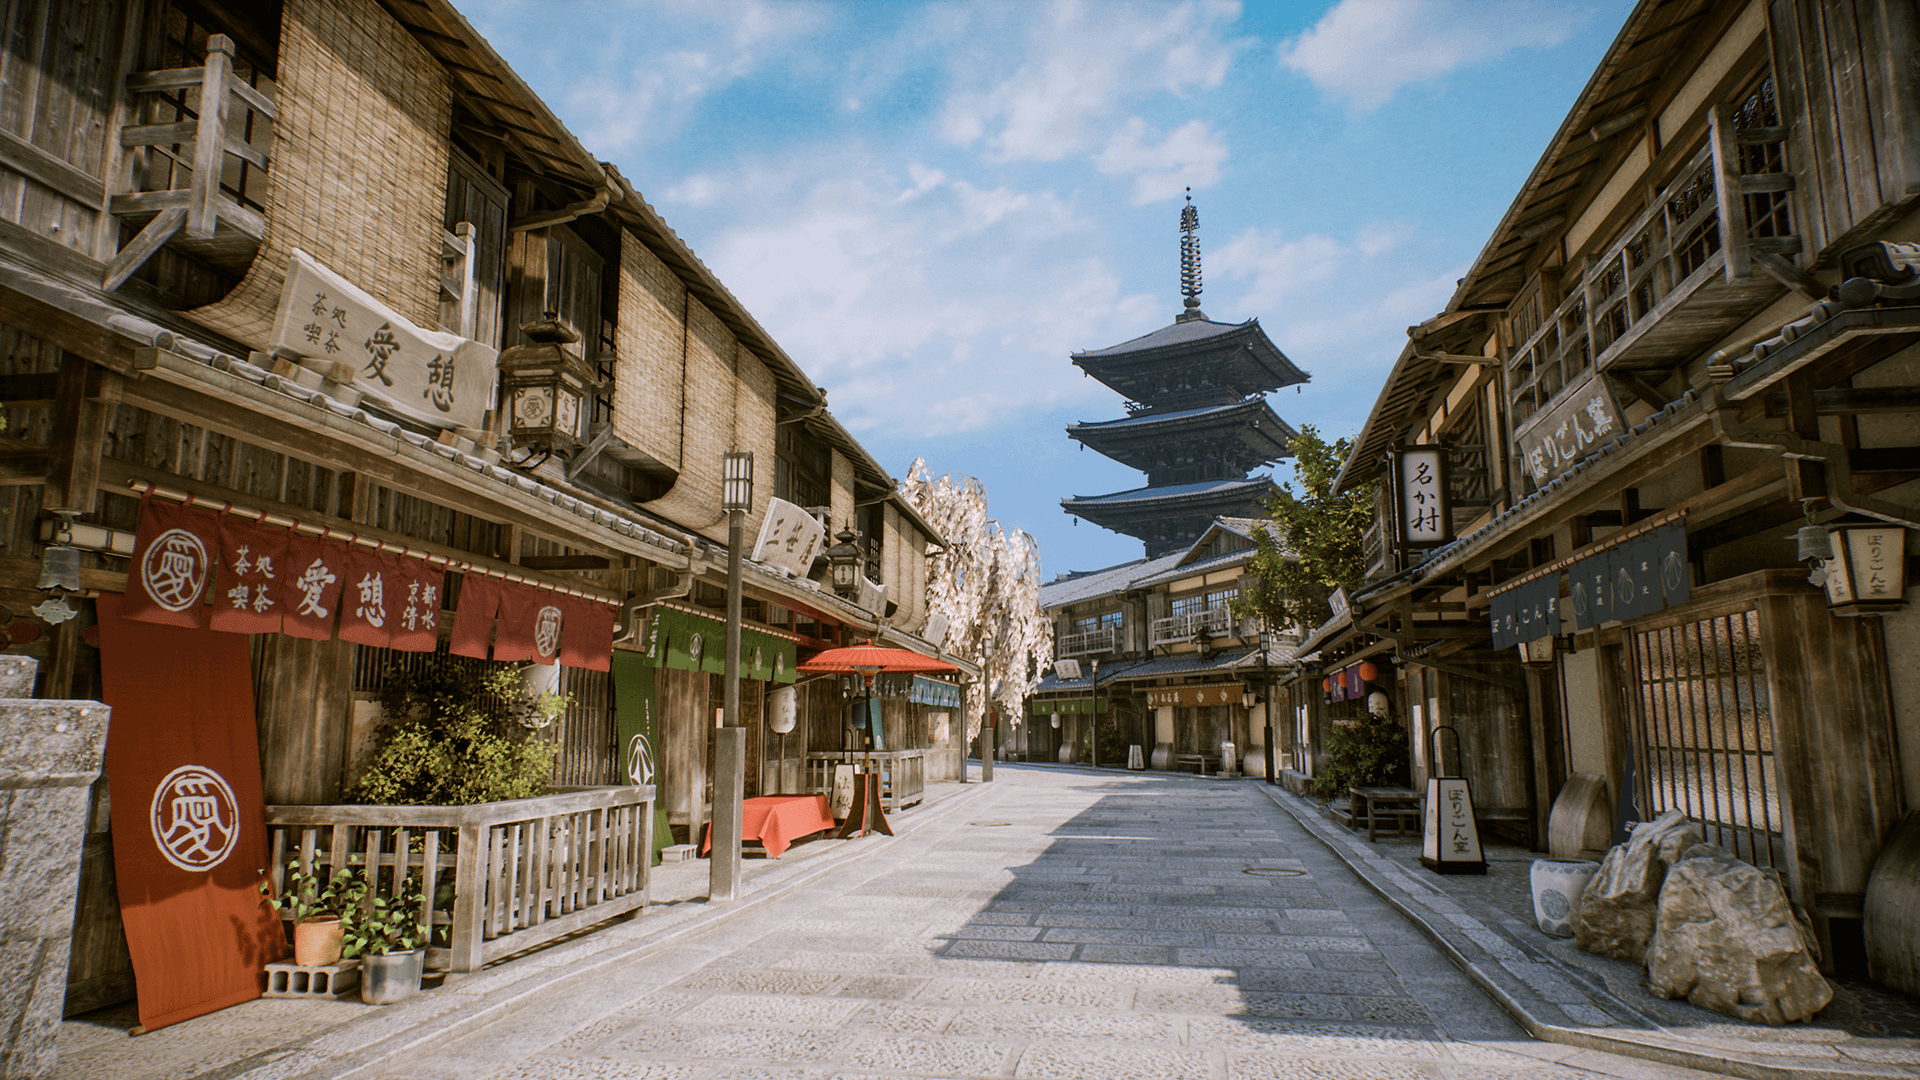 Ue4向け京都背景アセット Kyoto Alley が18 075円でリリース 商用利用も可能 Game Spark 国内 海外ゲーム情報サイト